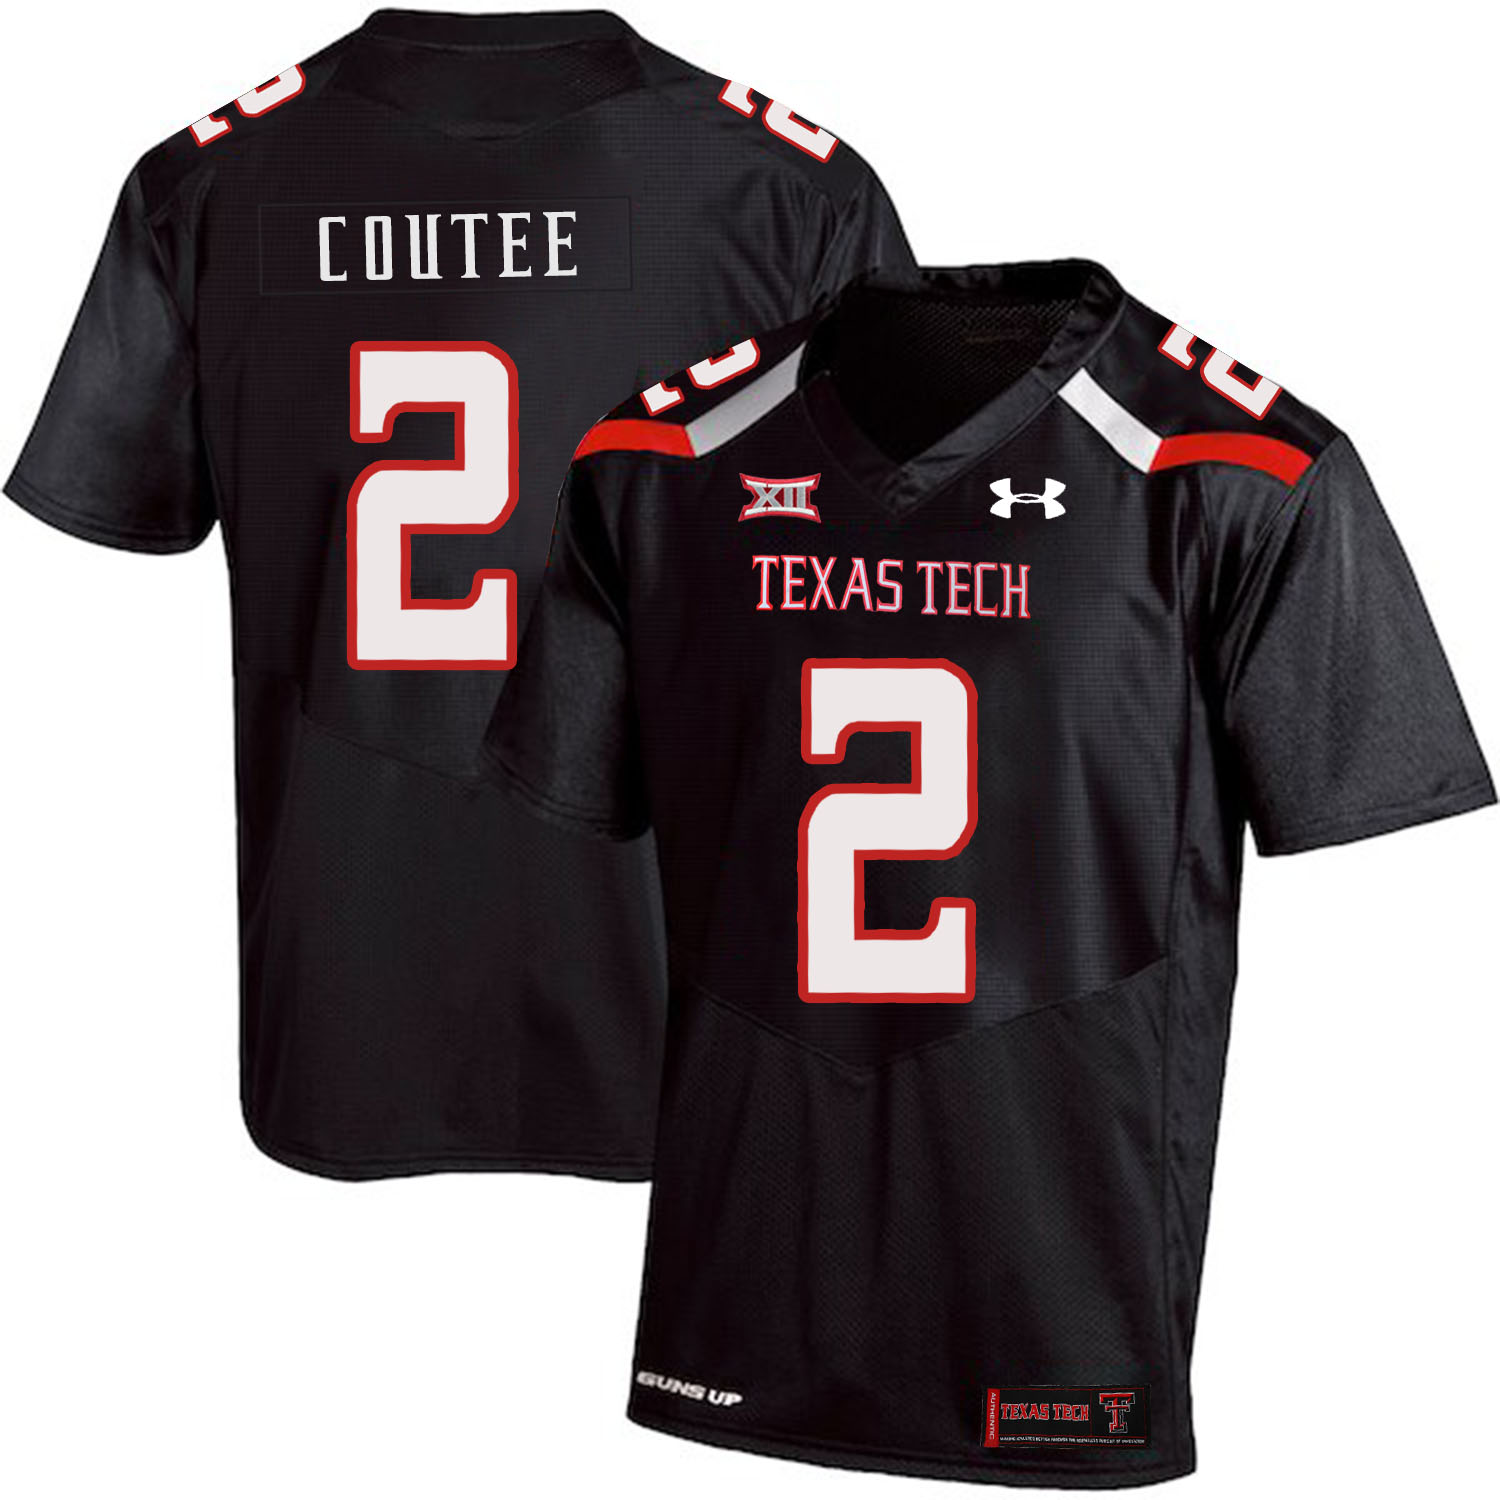 Texas Tech Red Raiders 2 Keke Coutee Black College Football Jersey